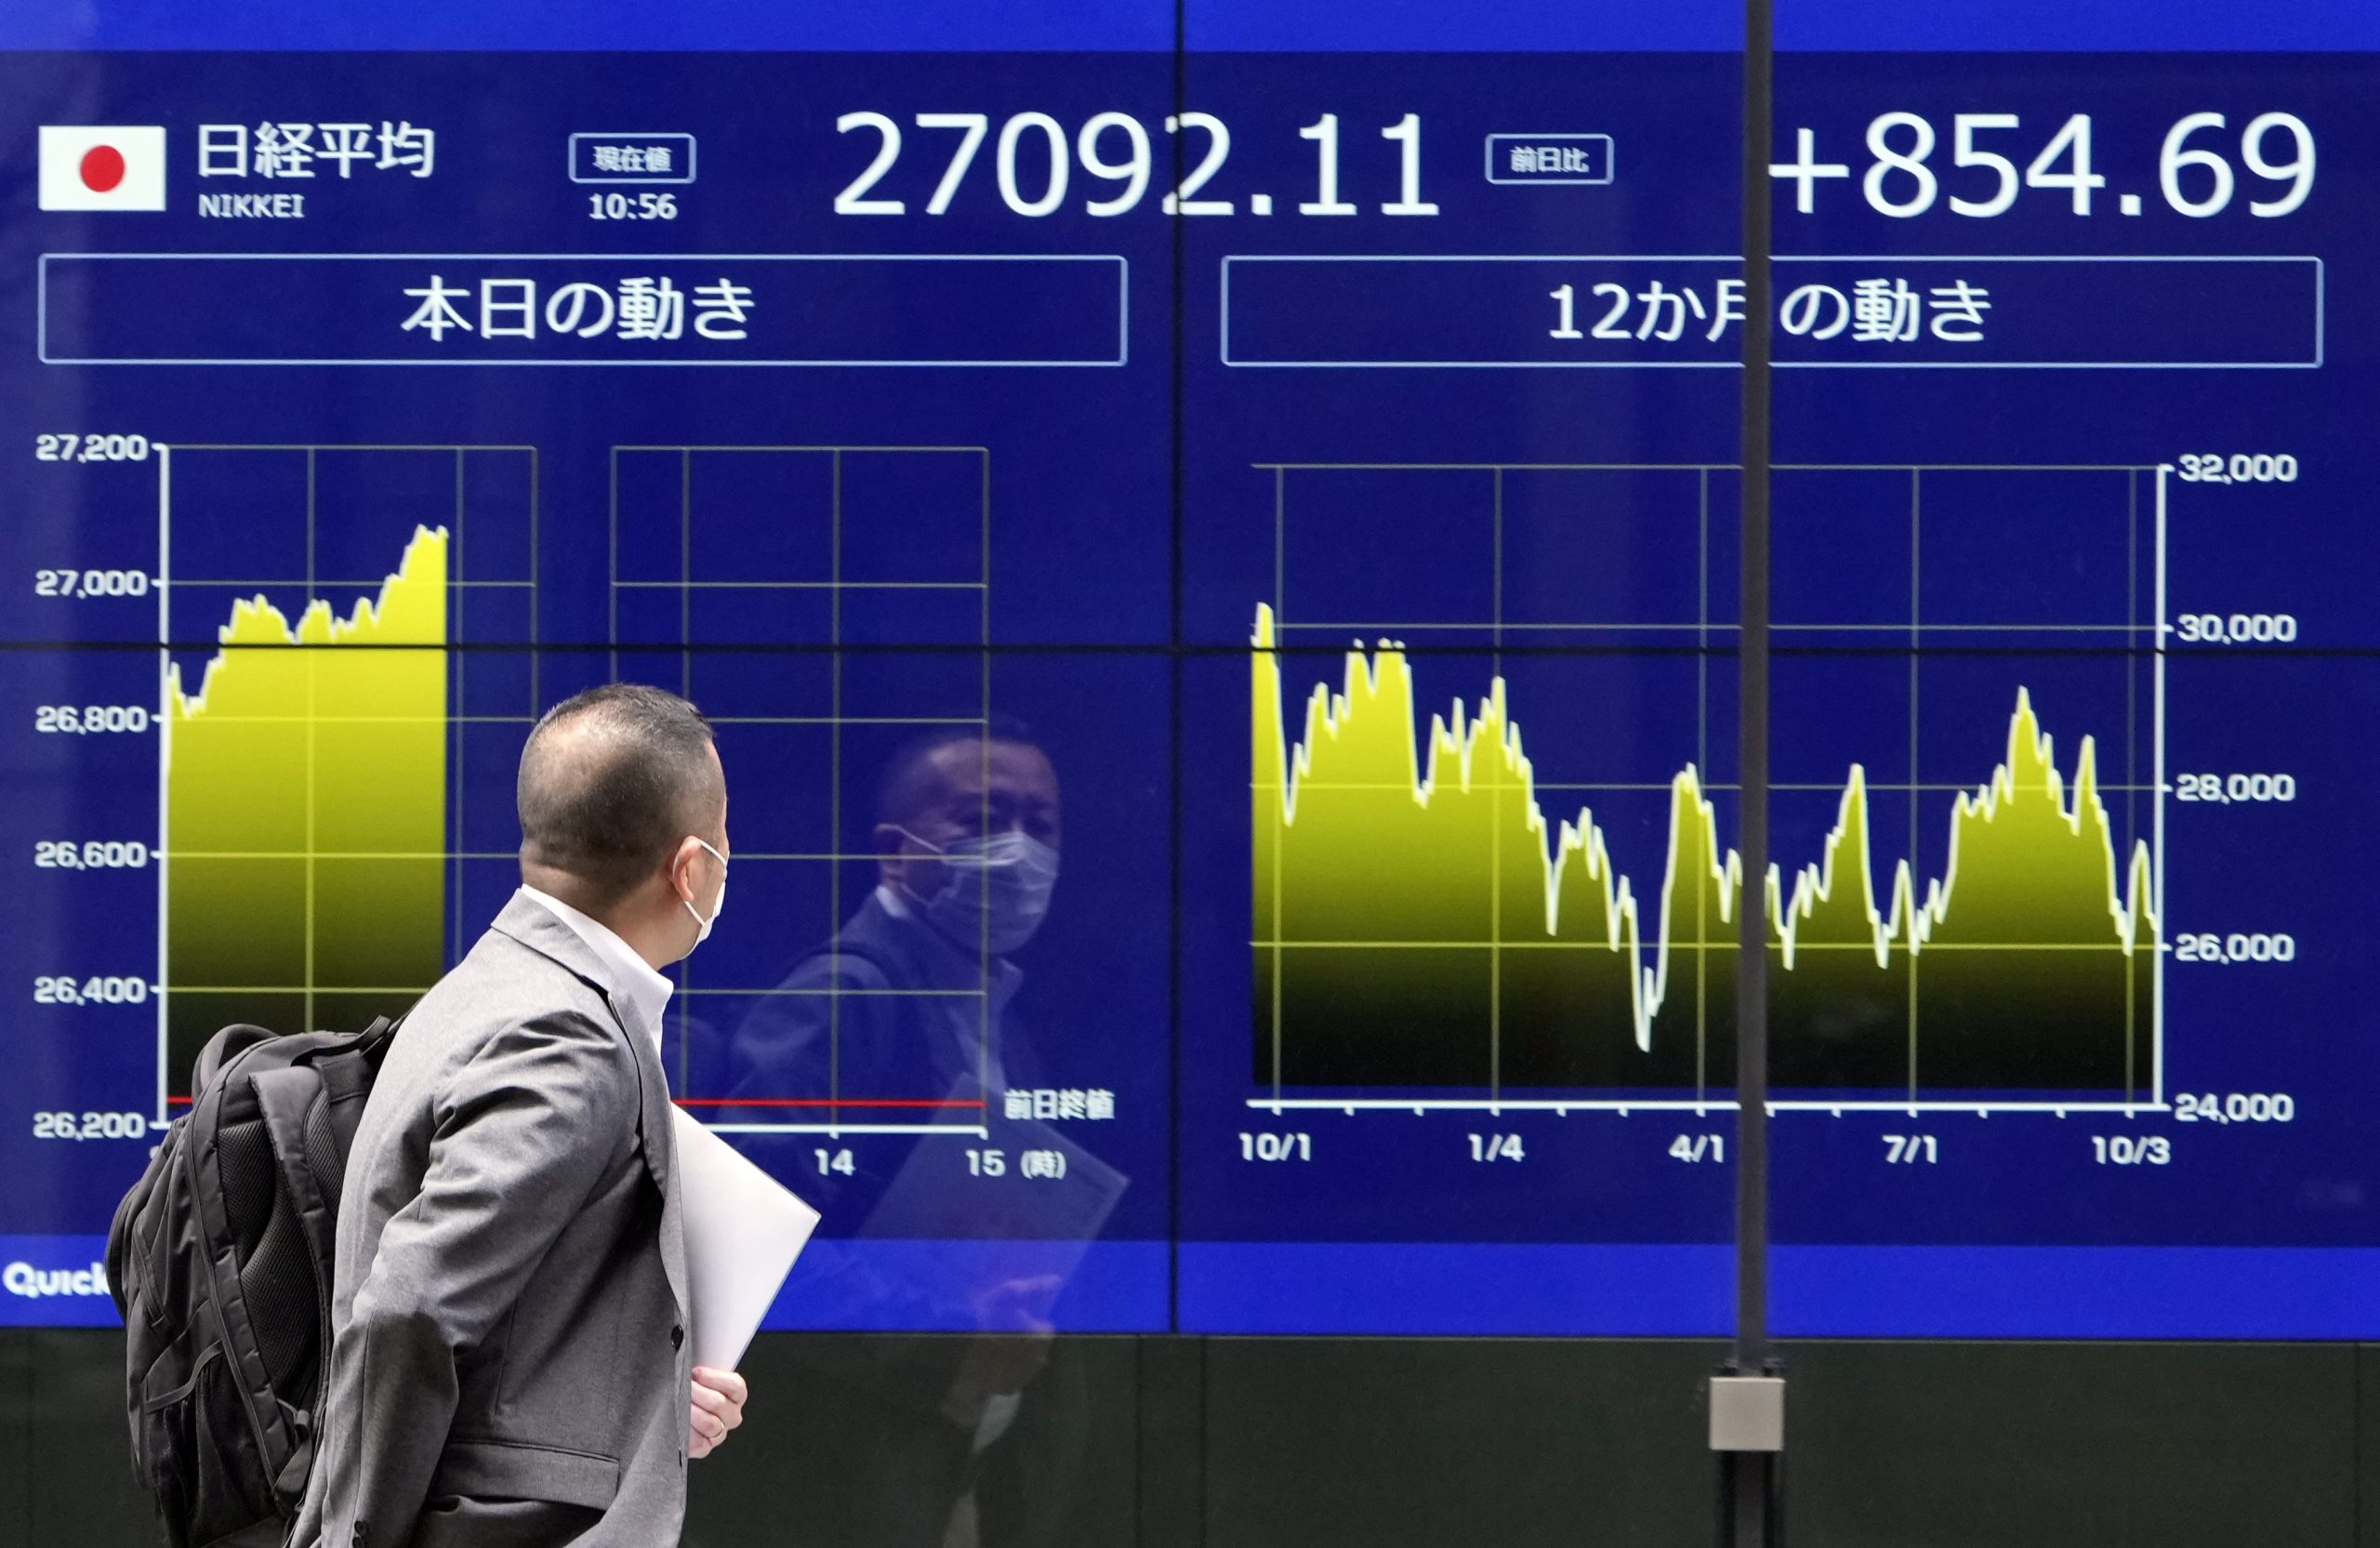 epa10242558 A passerby walks past a stock market indicator board in Tokyo, Japan, 14 October 2022. Tokyo's Nikkei stock index jumped more than 3 percent during the morning trading session following overnight gains at New York’s Wall Street.  EPA/FRANCK ROBICHON